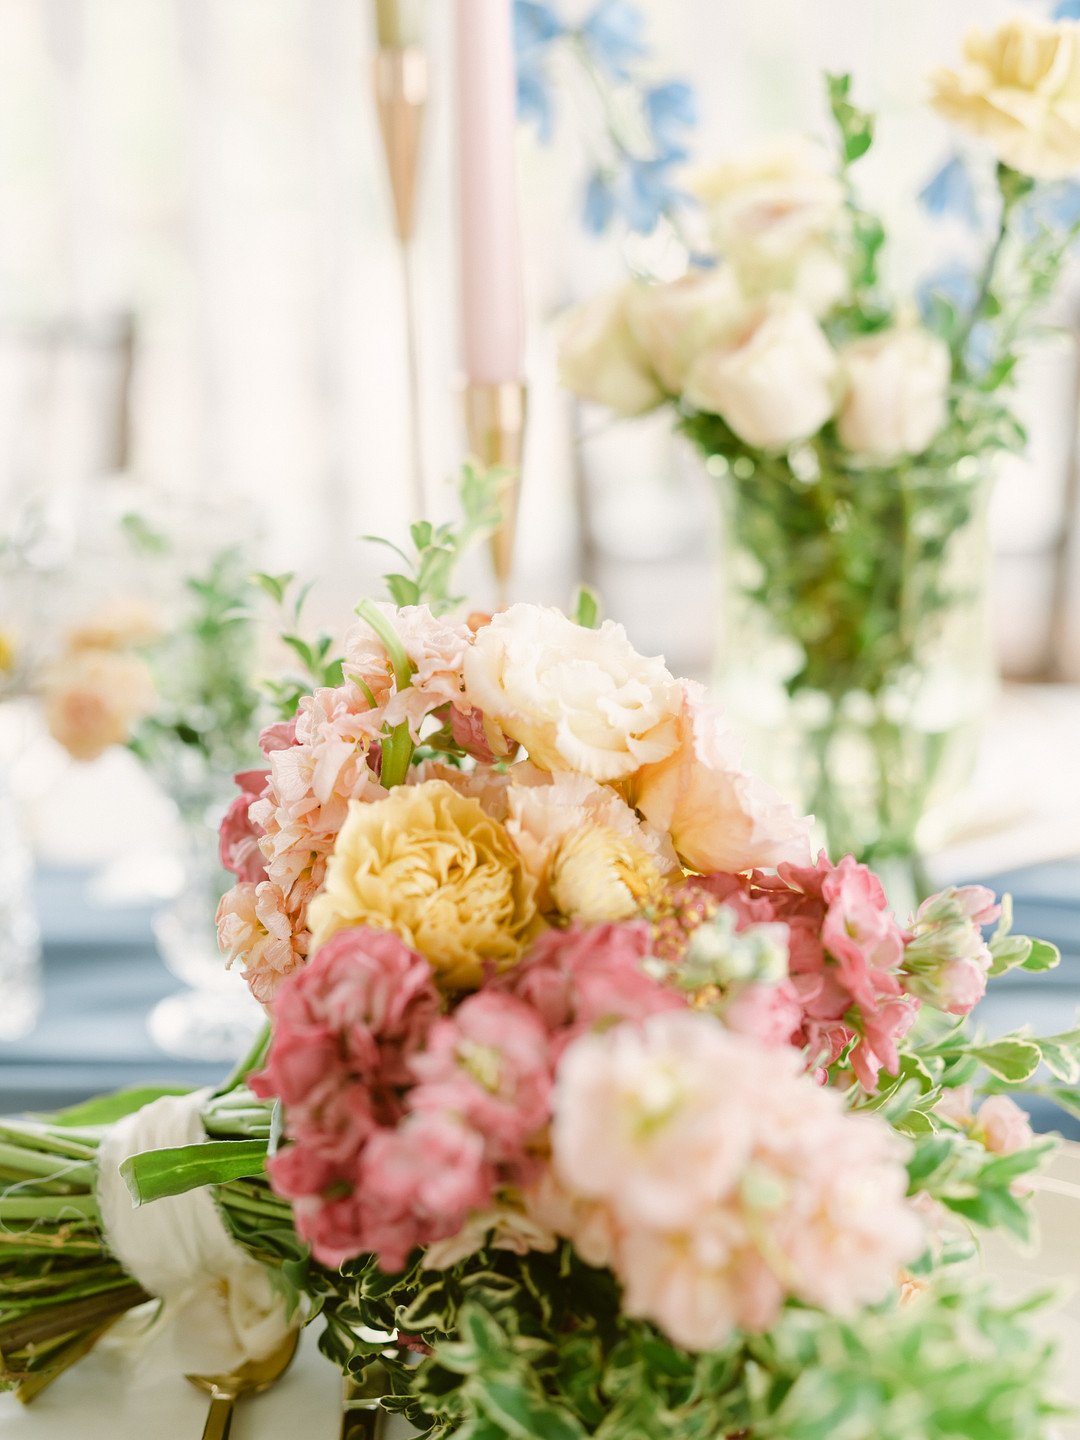 A Southern editorial with a painterly flow, inspired by the impressionist style of Claude Monet_Jessica Blackburn Photography, llc_DSC05099_low.jpg